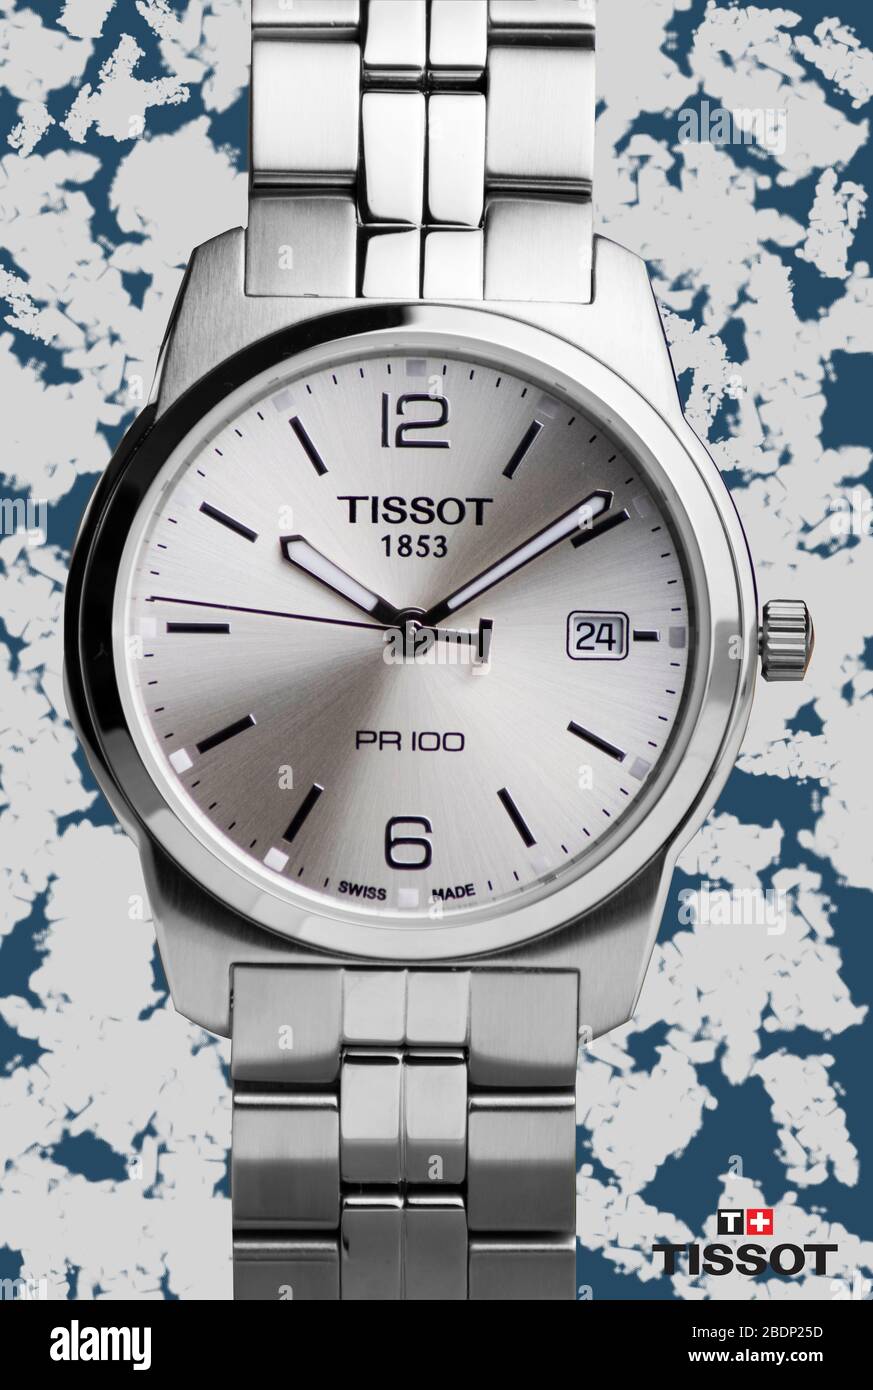 Alexandria, Egypt March 3, 2020 Tissot classic watch advertising with abstract background Stock Photo